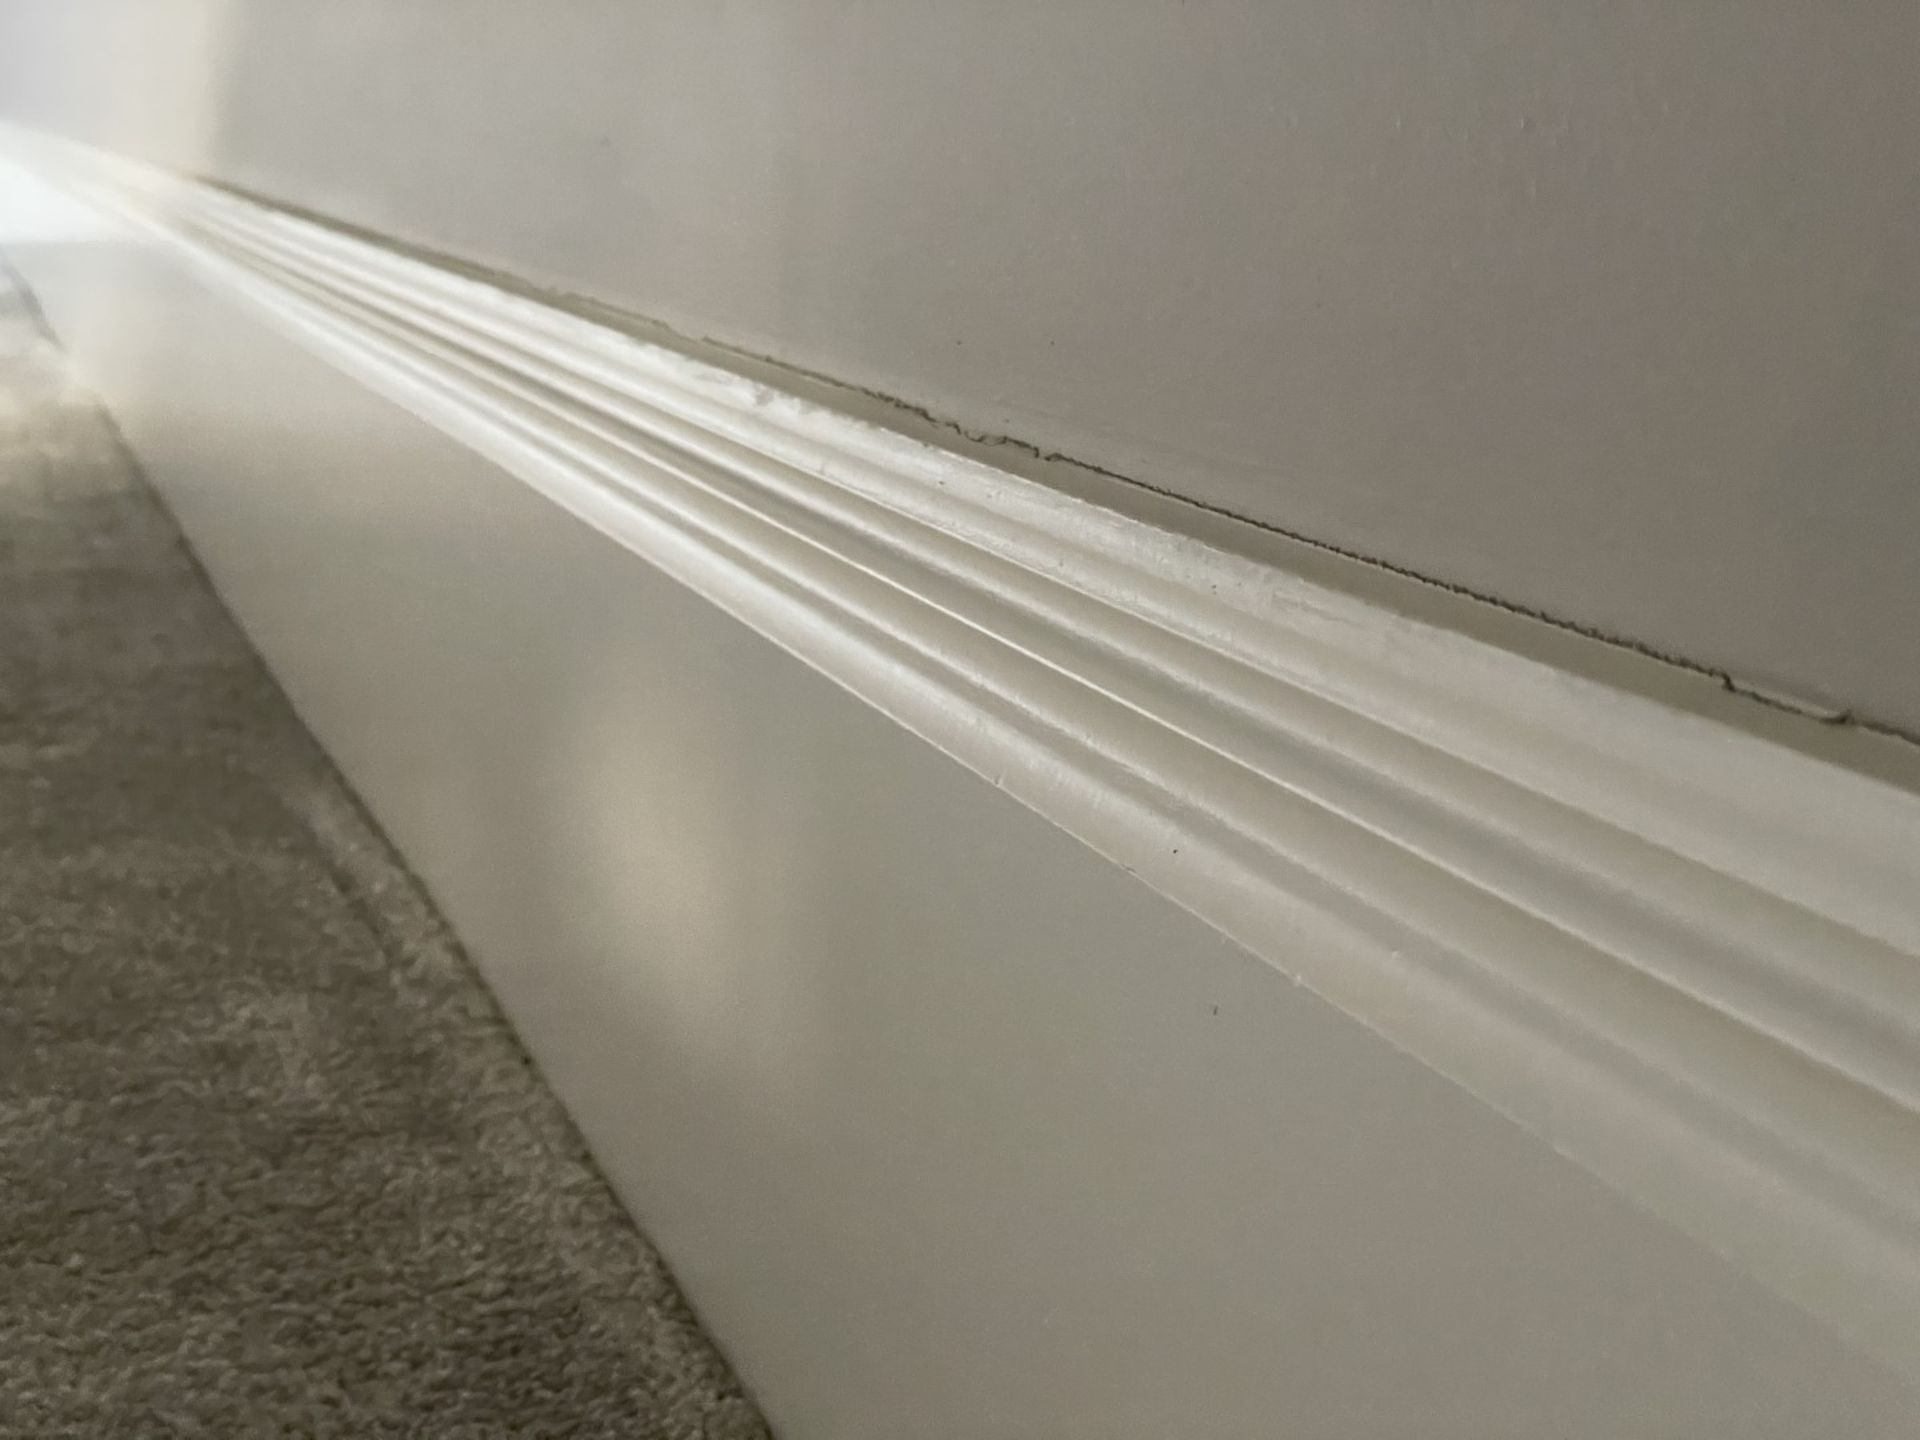 Approximately 10-Metres of Painted Timber Wooden Skirting Boards, In White - Ref: PAN210 - CL896 - - Image 4 of 9